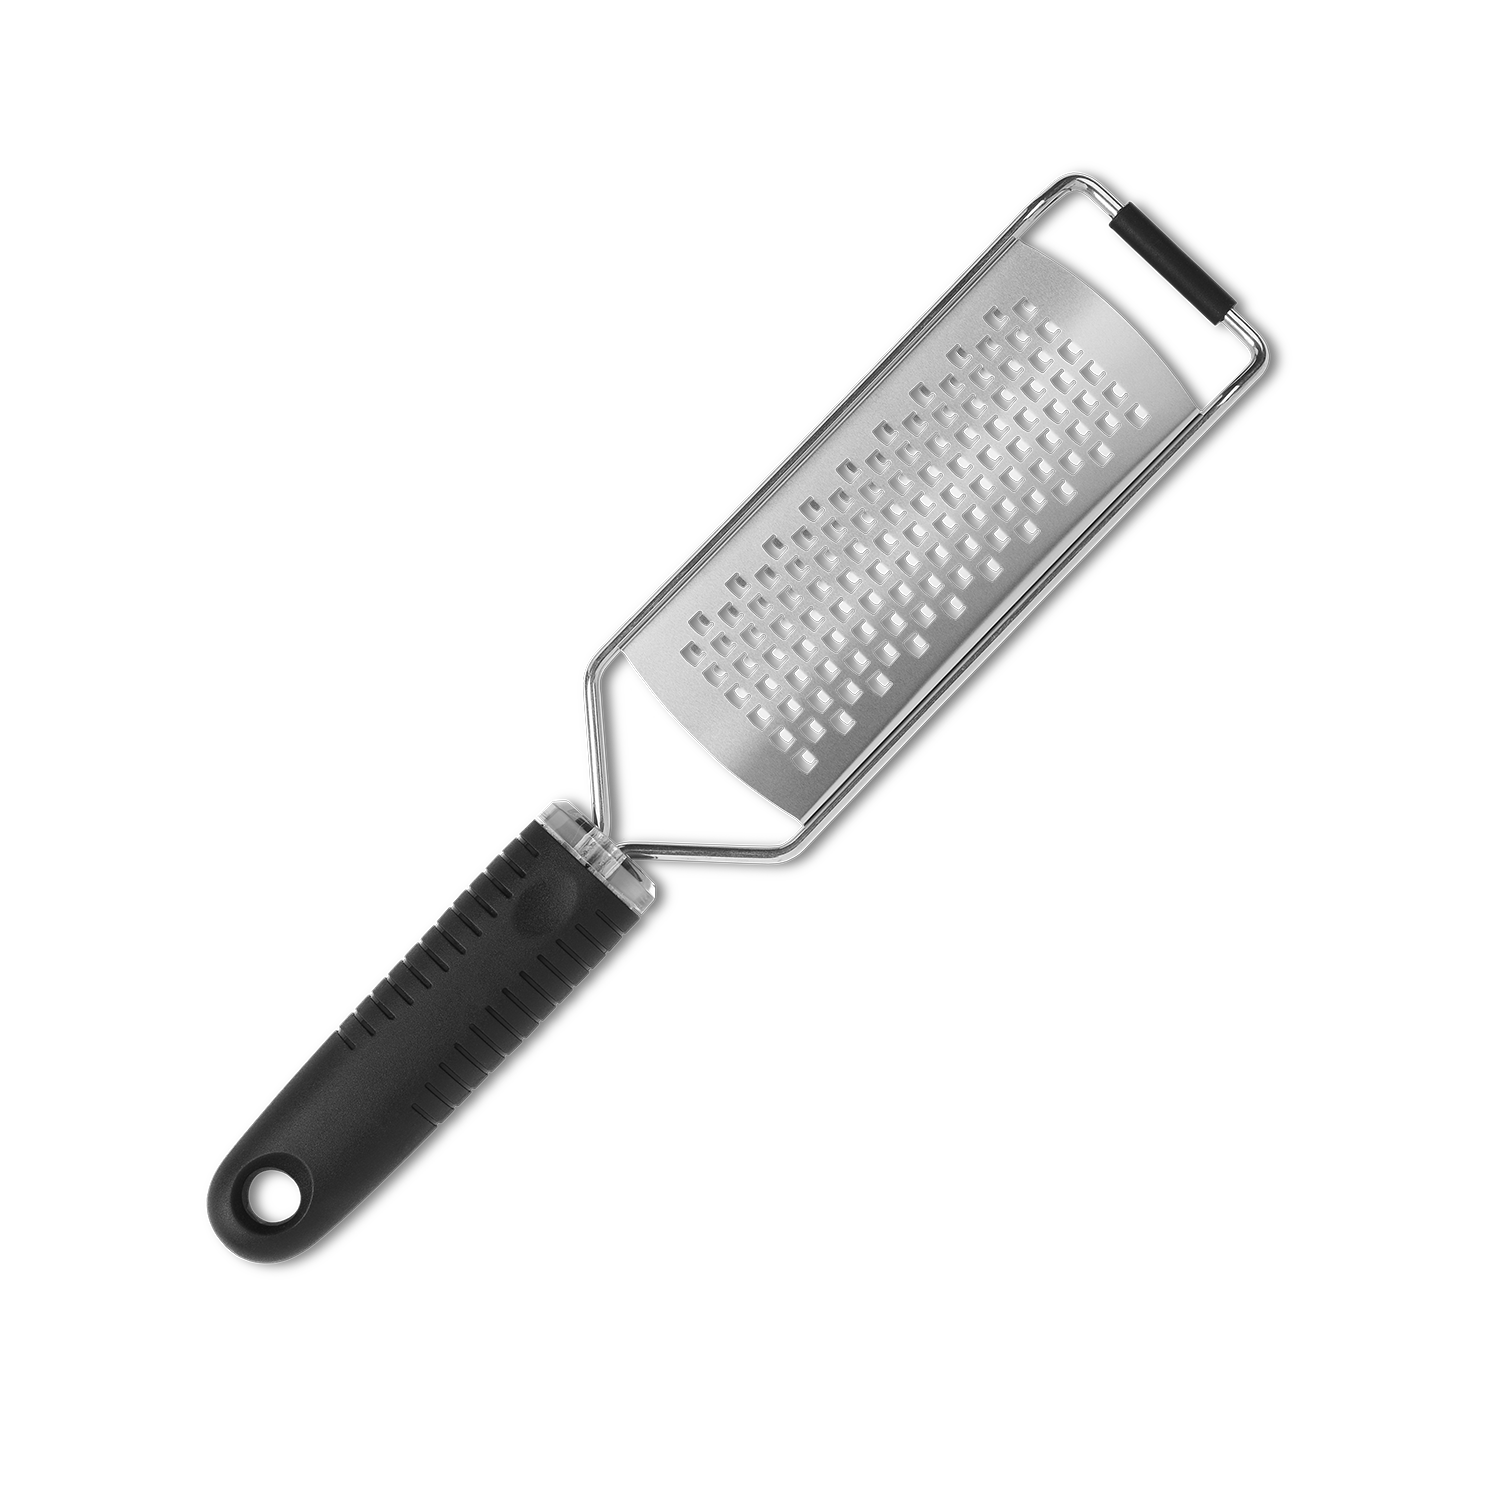 Order Now Coarse Grater Small